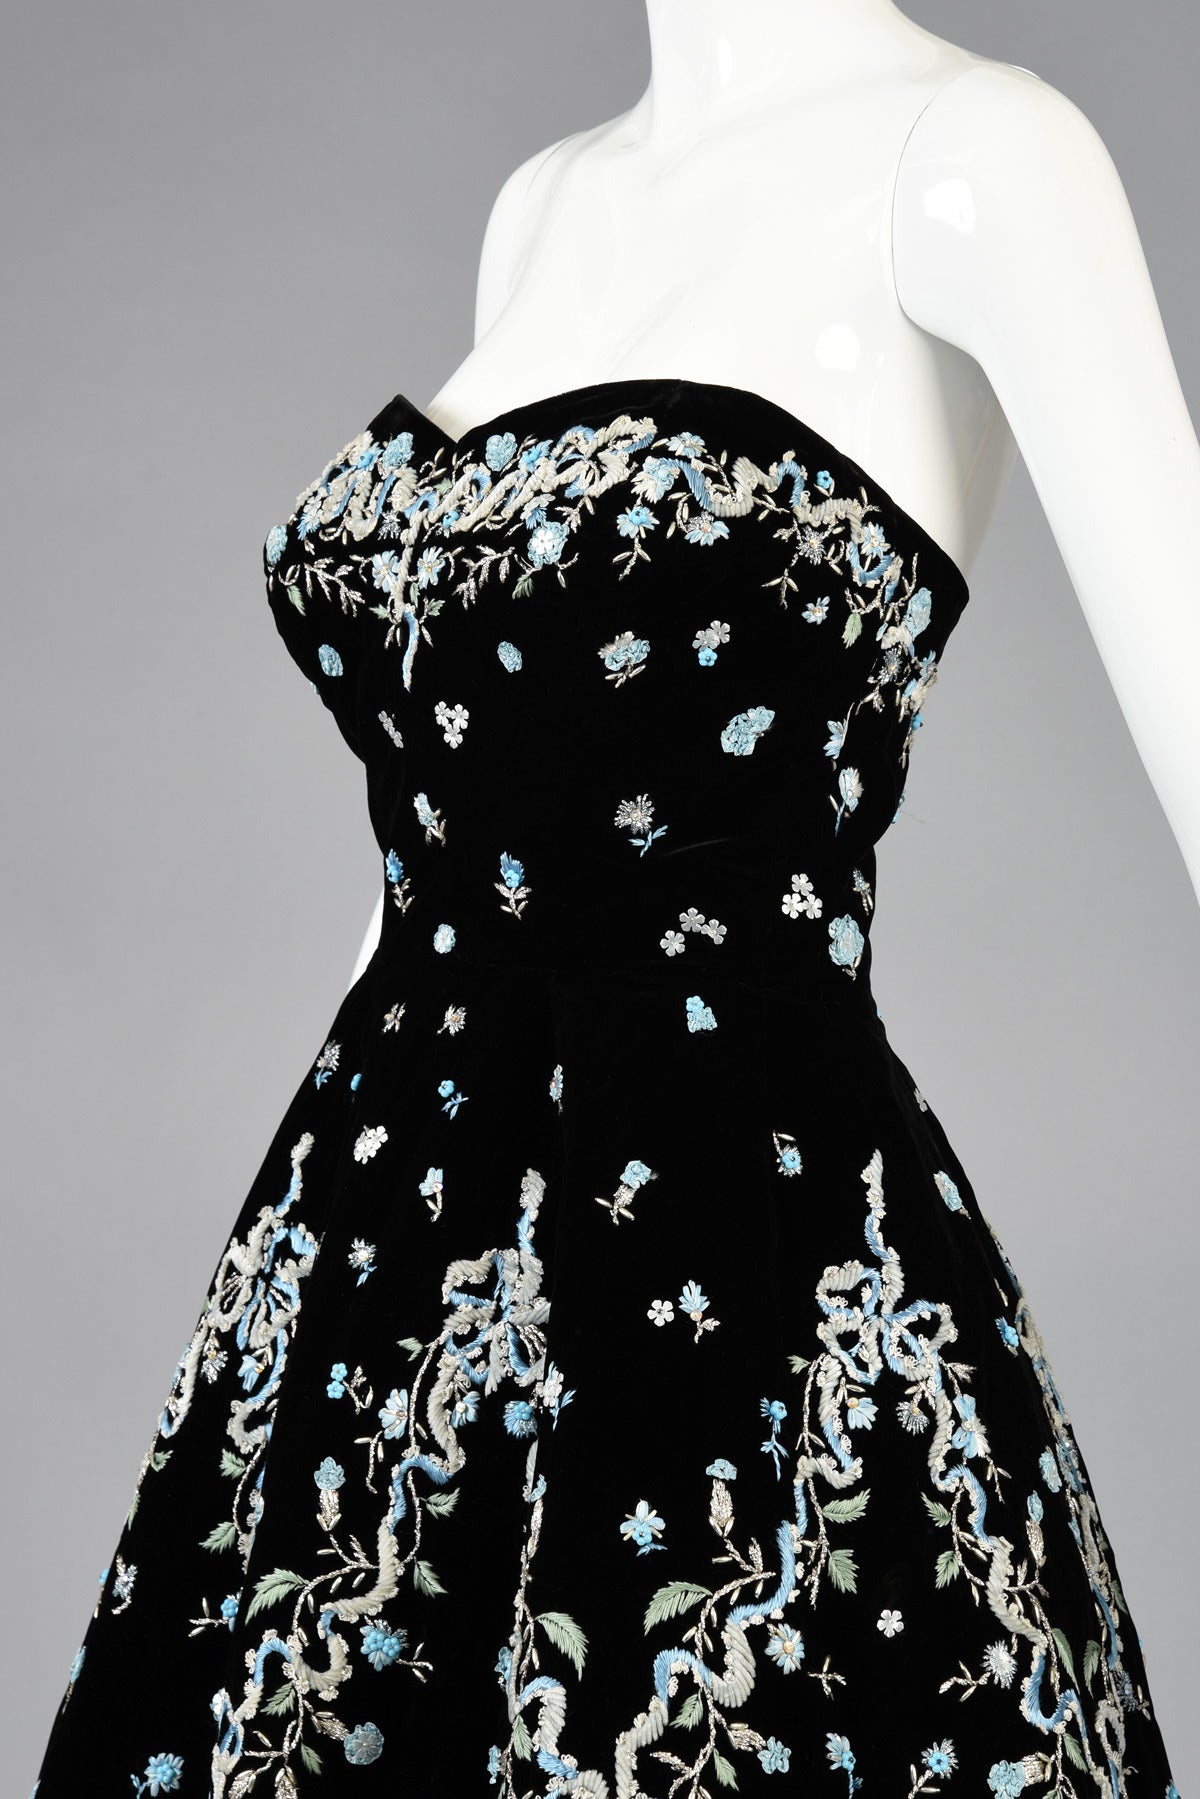 Black 1957 Pierre Balmain Haute Couture Cocktail Dress with Lesage Embroidery For Sale